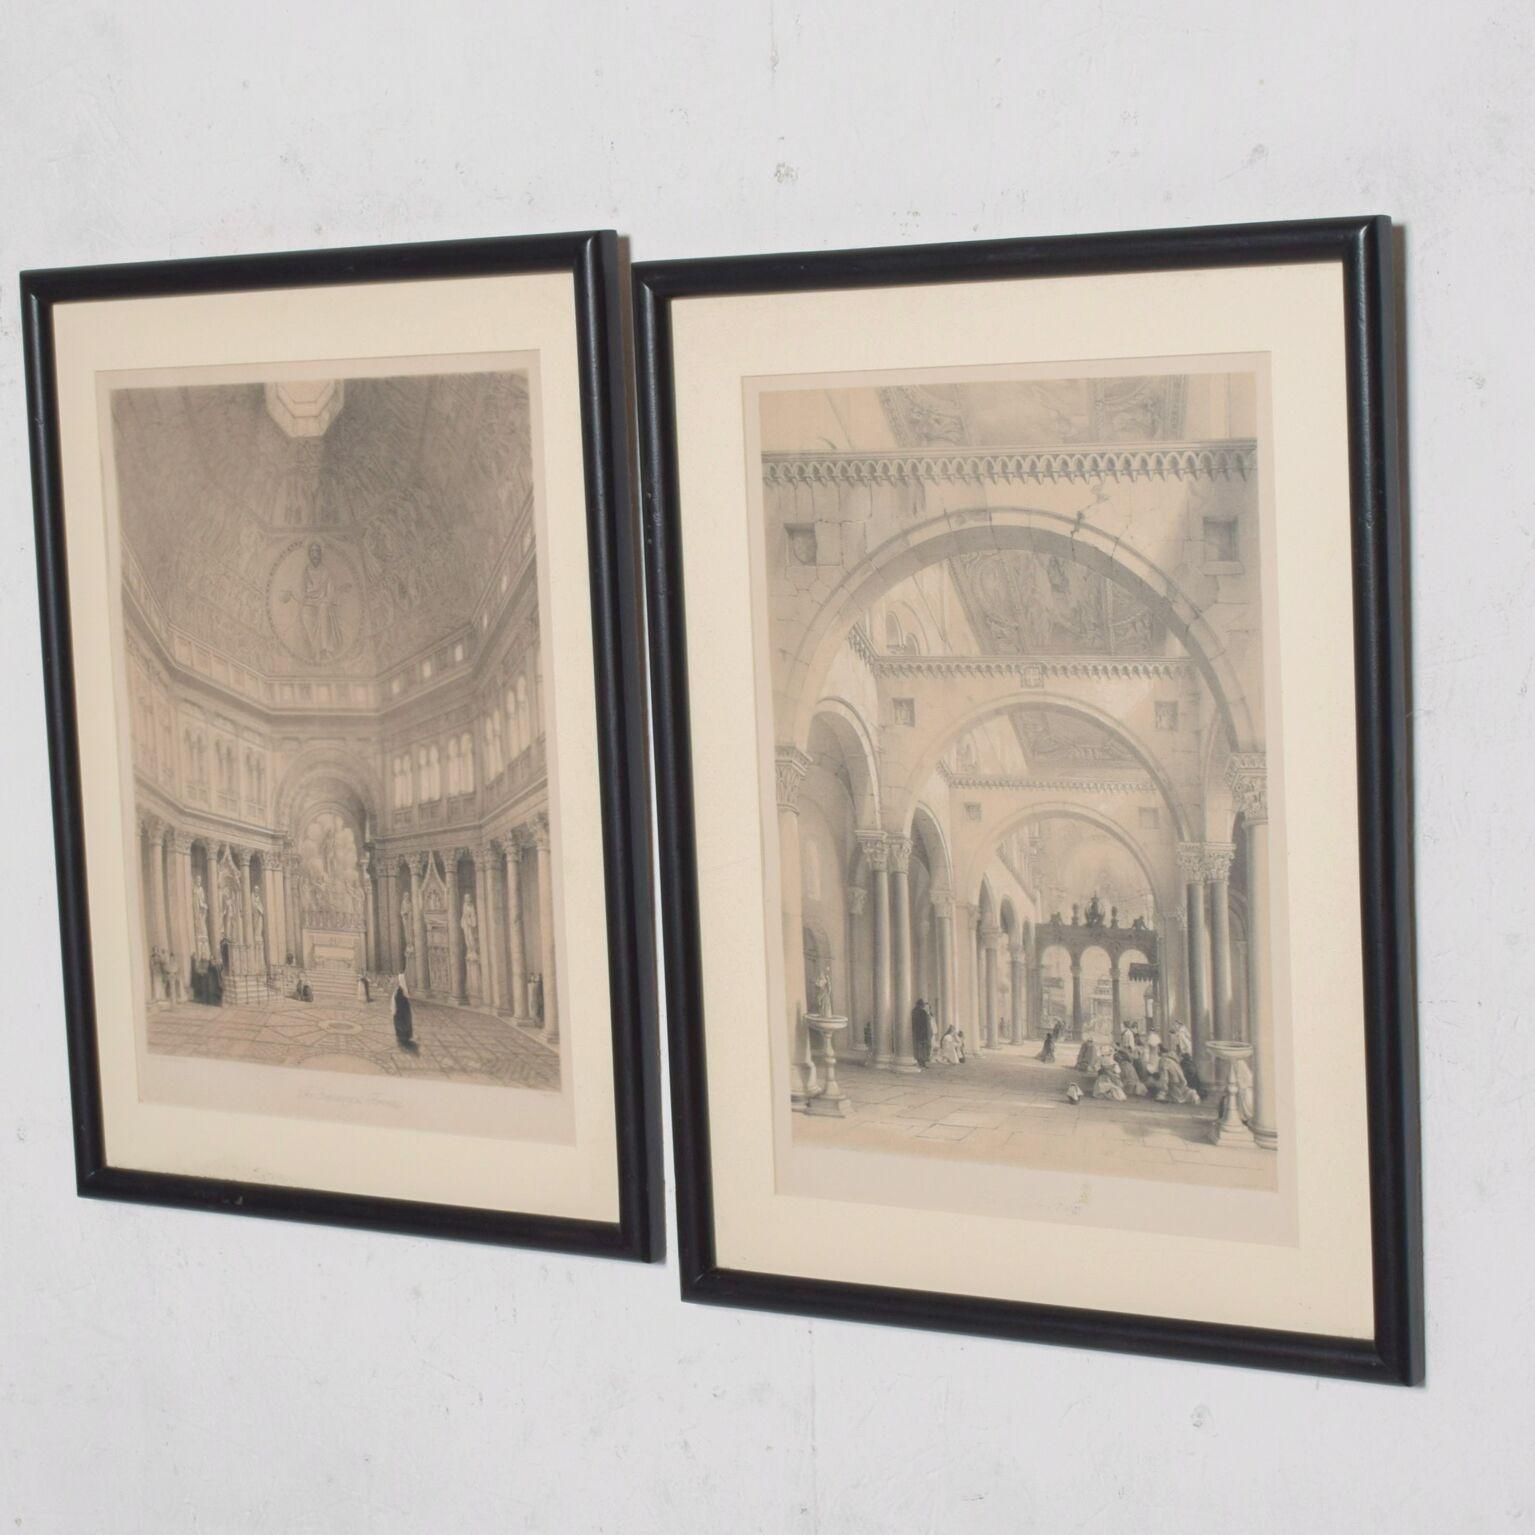 Pair of Black framed Italian Architectural Cathedral Image Lithographs
No information available on artist. 
Appears as lithograph type. 
Listing is for the pair.
15